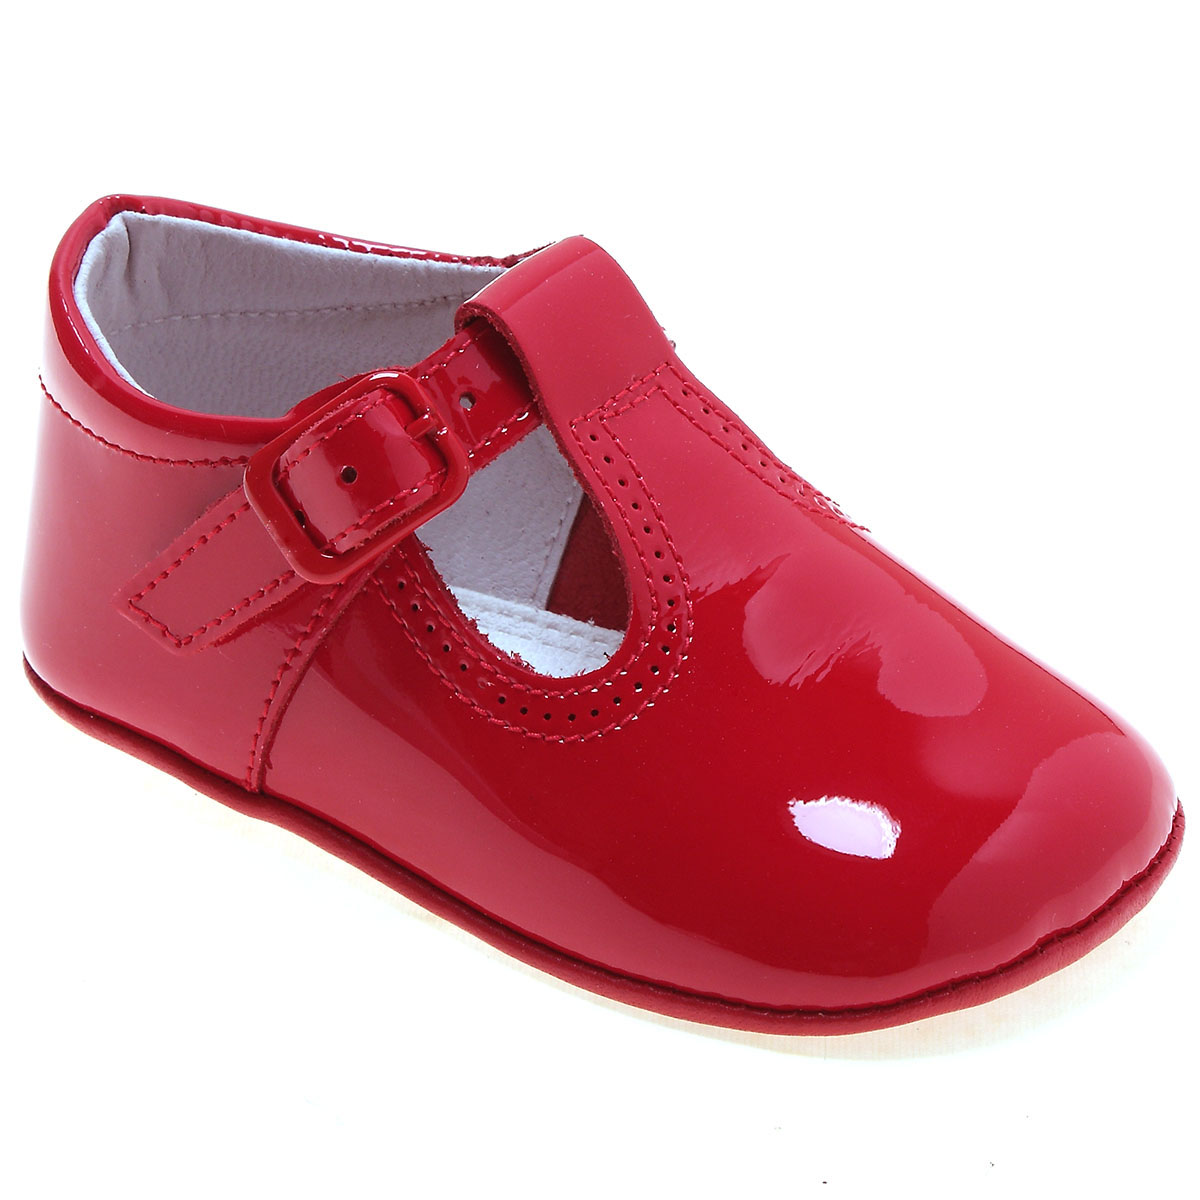 newborn patent leather shoes